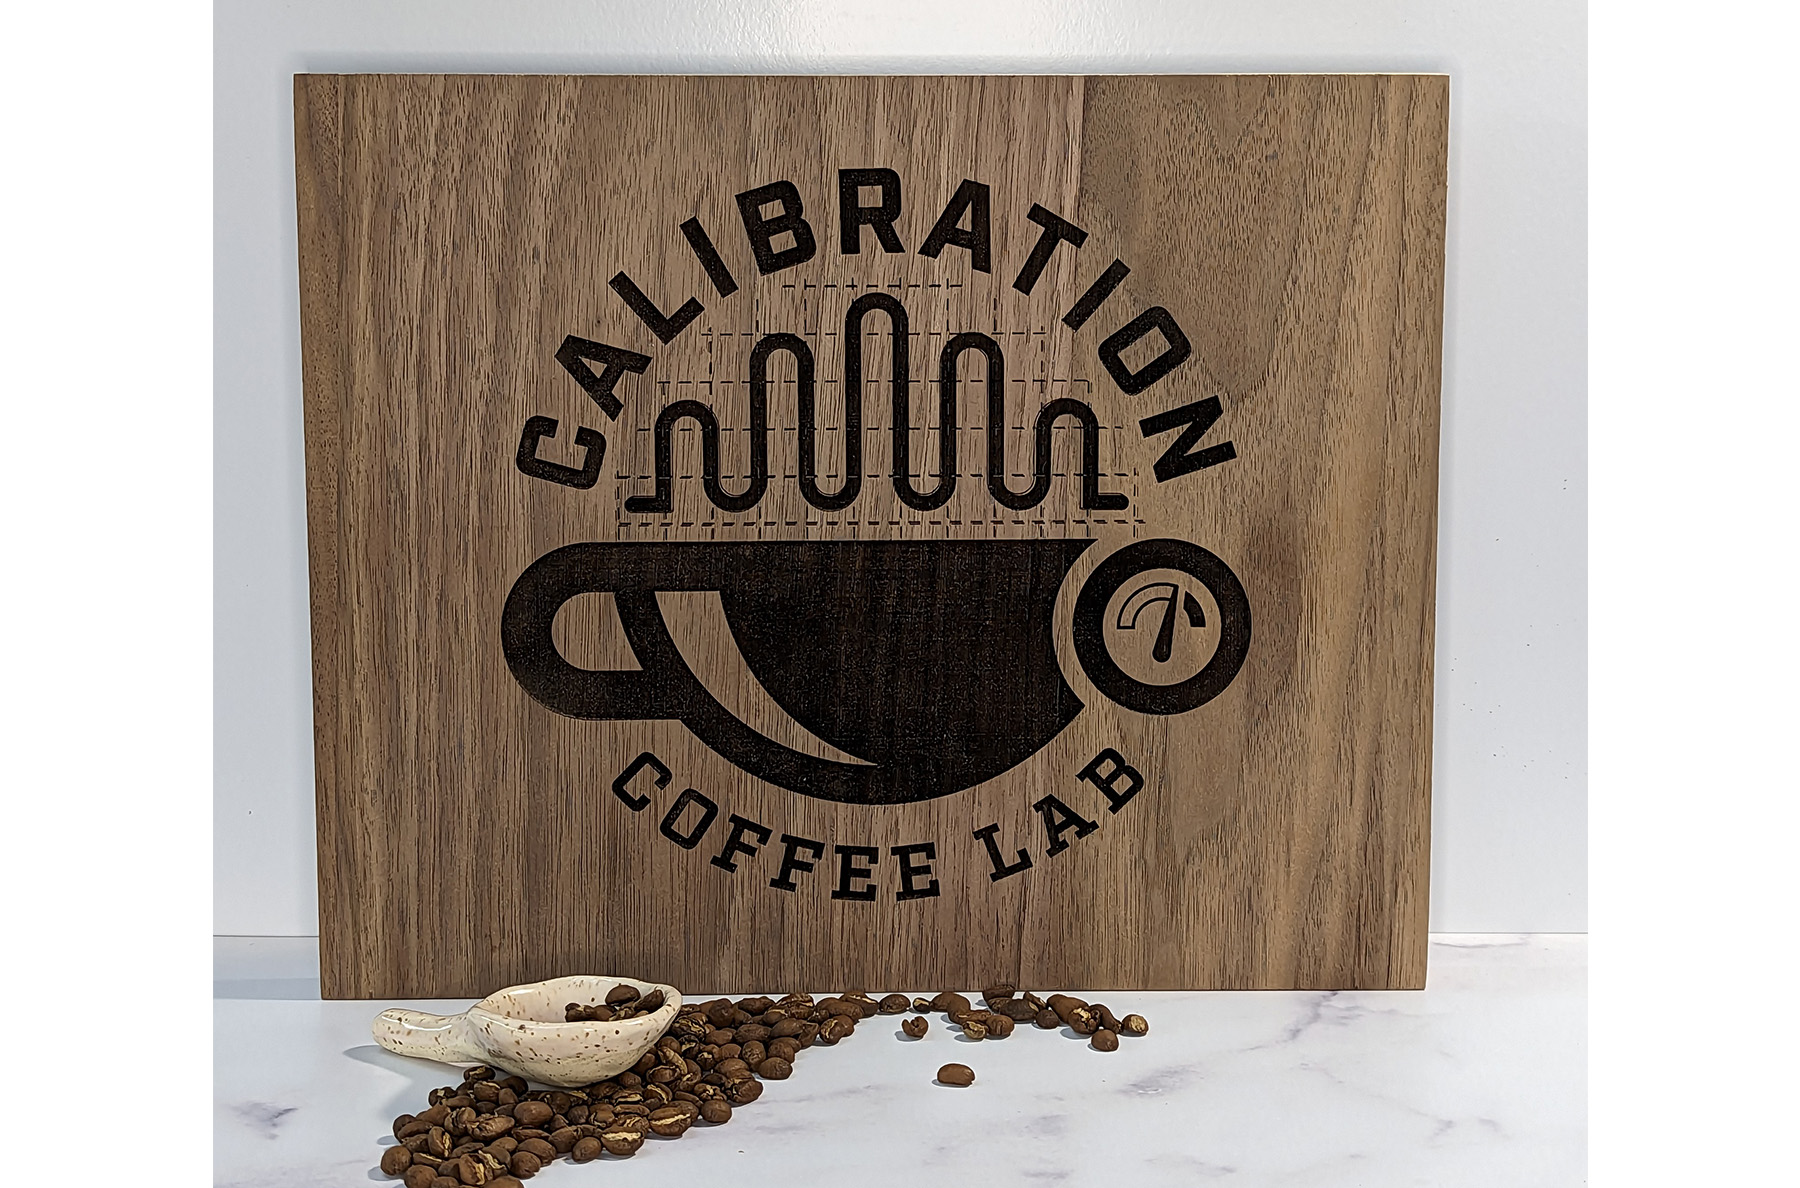 Before Alex LeBlanc started Calibration Coffee Lab in Greenville, South Carolina, he was a mechanical engineer by trade, a home brewer, a home distiller, and a home coffee roaster. So what led him to leave the world of engineering to start Calibration Coffee Lab, and roast beans for a living? And how did he go about doing it? Our latest CRAFTED podcast explores the process of turning your passion into a business.